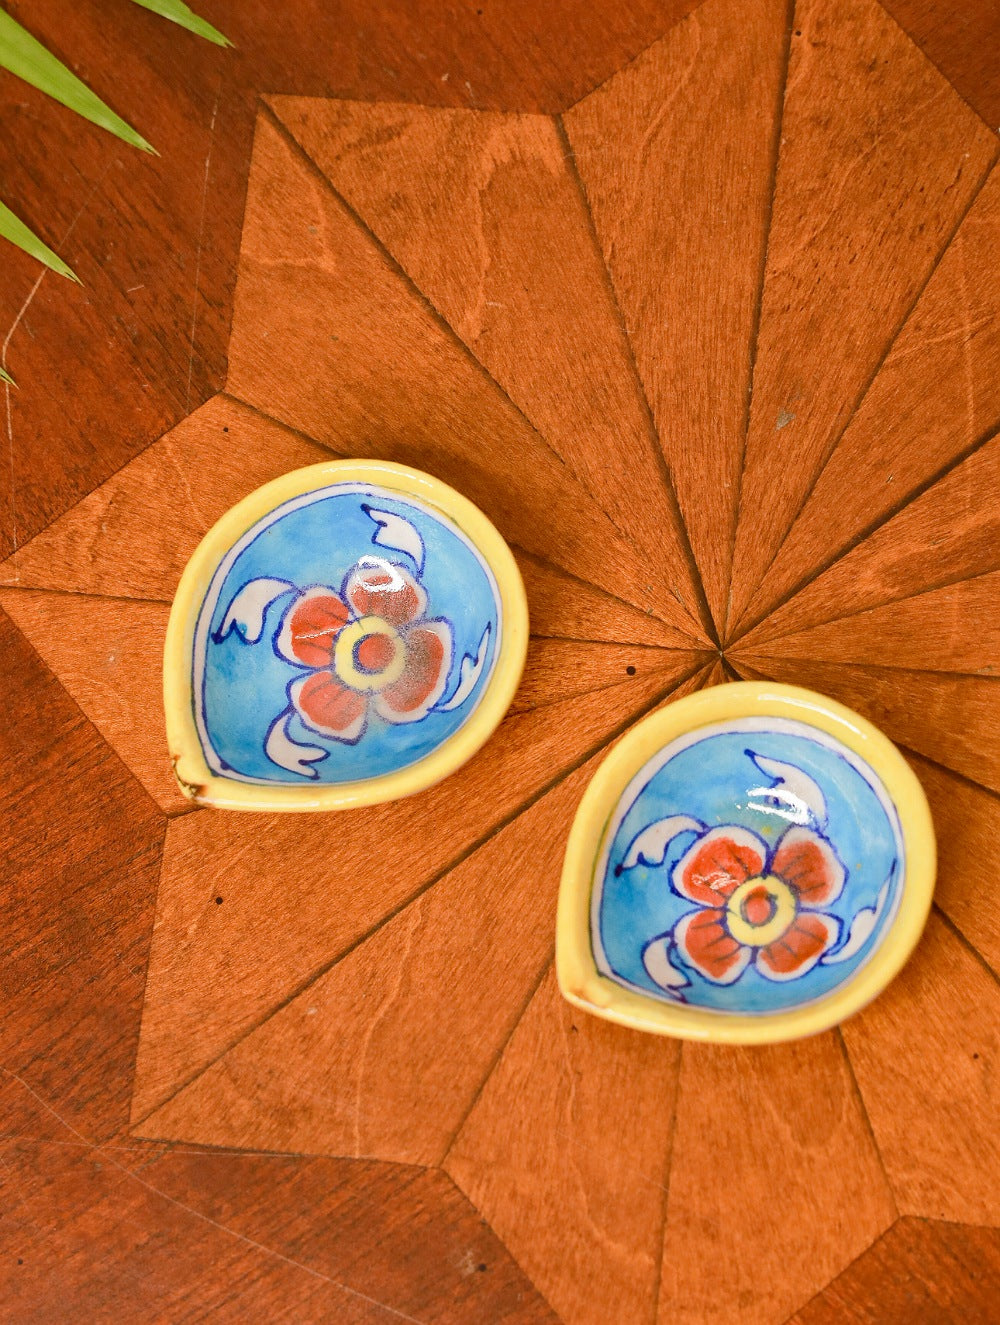 Load image into Gallery viewer, Blue Pottery Diya (Set of 2) - Yellow and Blue